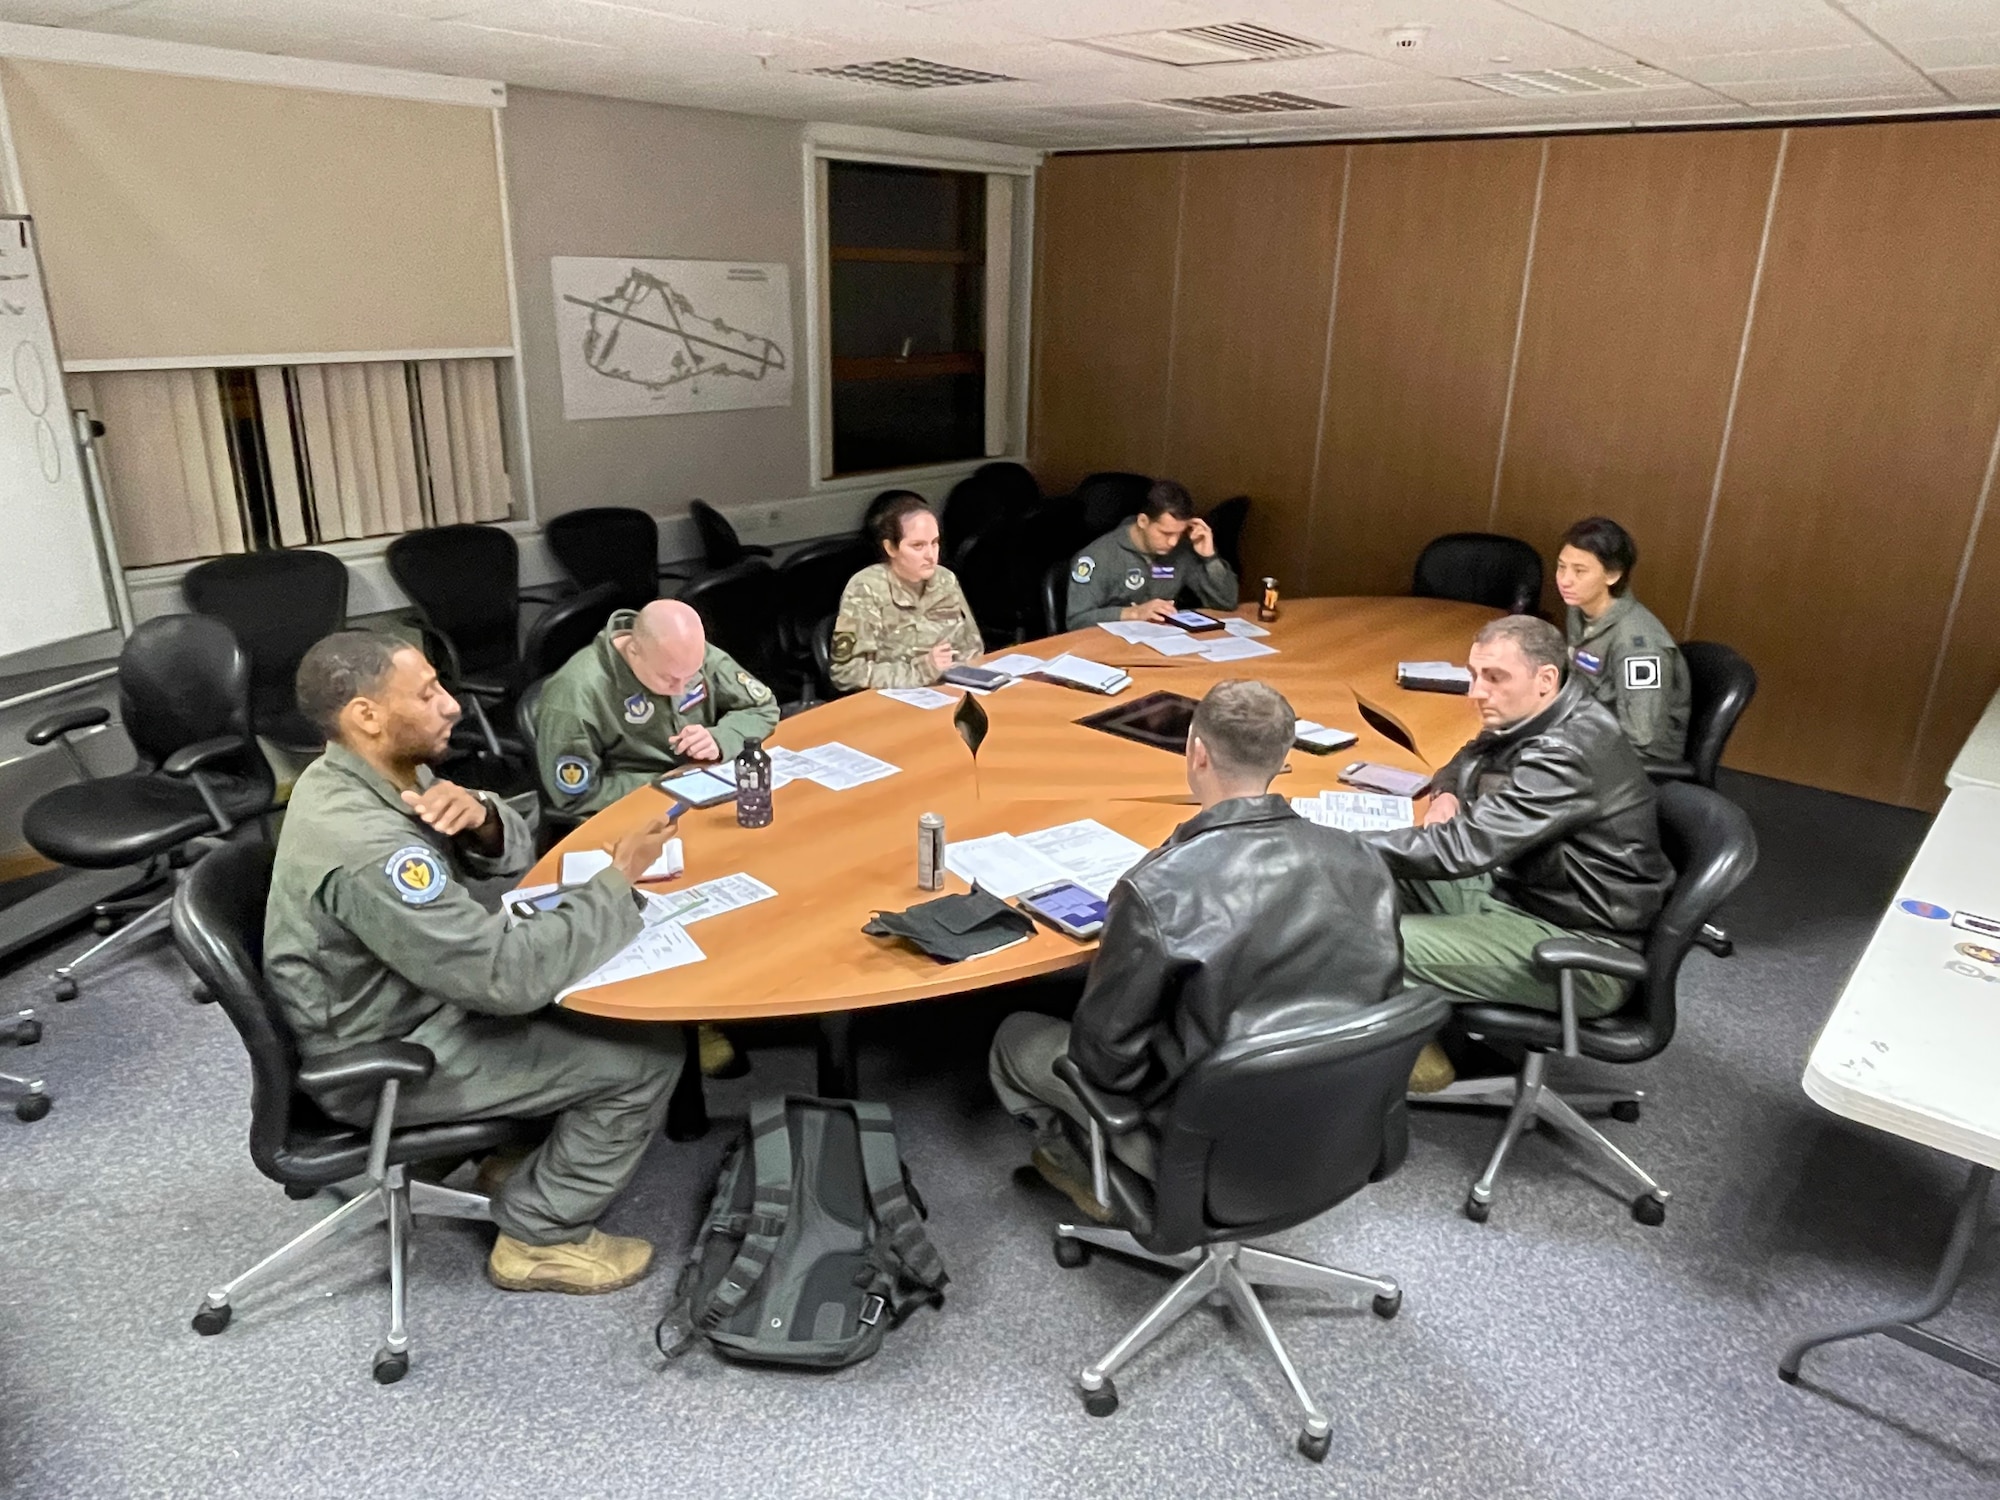 U.S. Airmen assigned to the 351st Air Refueling Squadron hold a preflight briefing during exercise Castle Forge at Royal Air Force Mildenhall, England, Nov. 1, 2021. The U.S. Air Force’s forward-deployed forces are engaged, postured and ready with credible force to assure, deter and defend in an increasingly complex security environment. Alongside F-15 operations in the Black Sea Region, Castle Forge encompasses the USAFE MAJCOM-wide Agile Combat Employment Initial Operating Capability capstone event. Both Castle Forge’s components will better enable forces to quickly disperse and continue to deliver air power from locations with varying levels of capacity and support, ensuring Airmen are always ready to respond to potential threats. (U.S. Air Force photo by Senior Airman Joseph Barron)